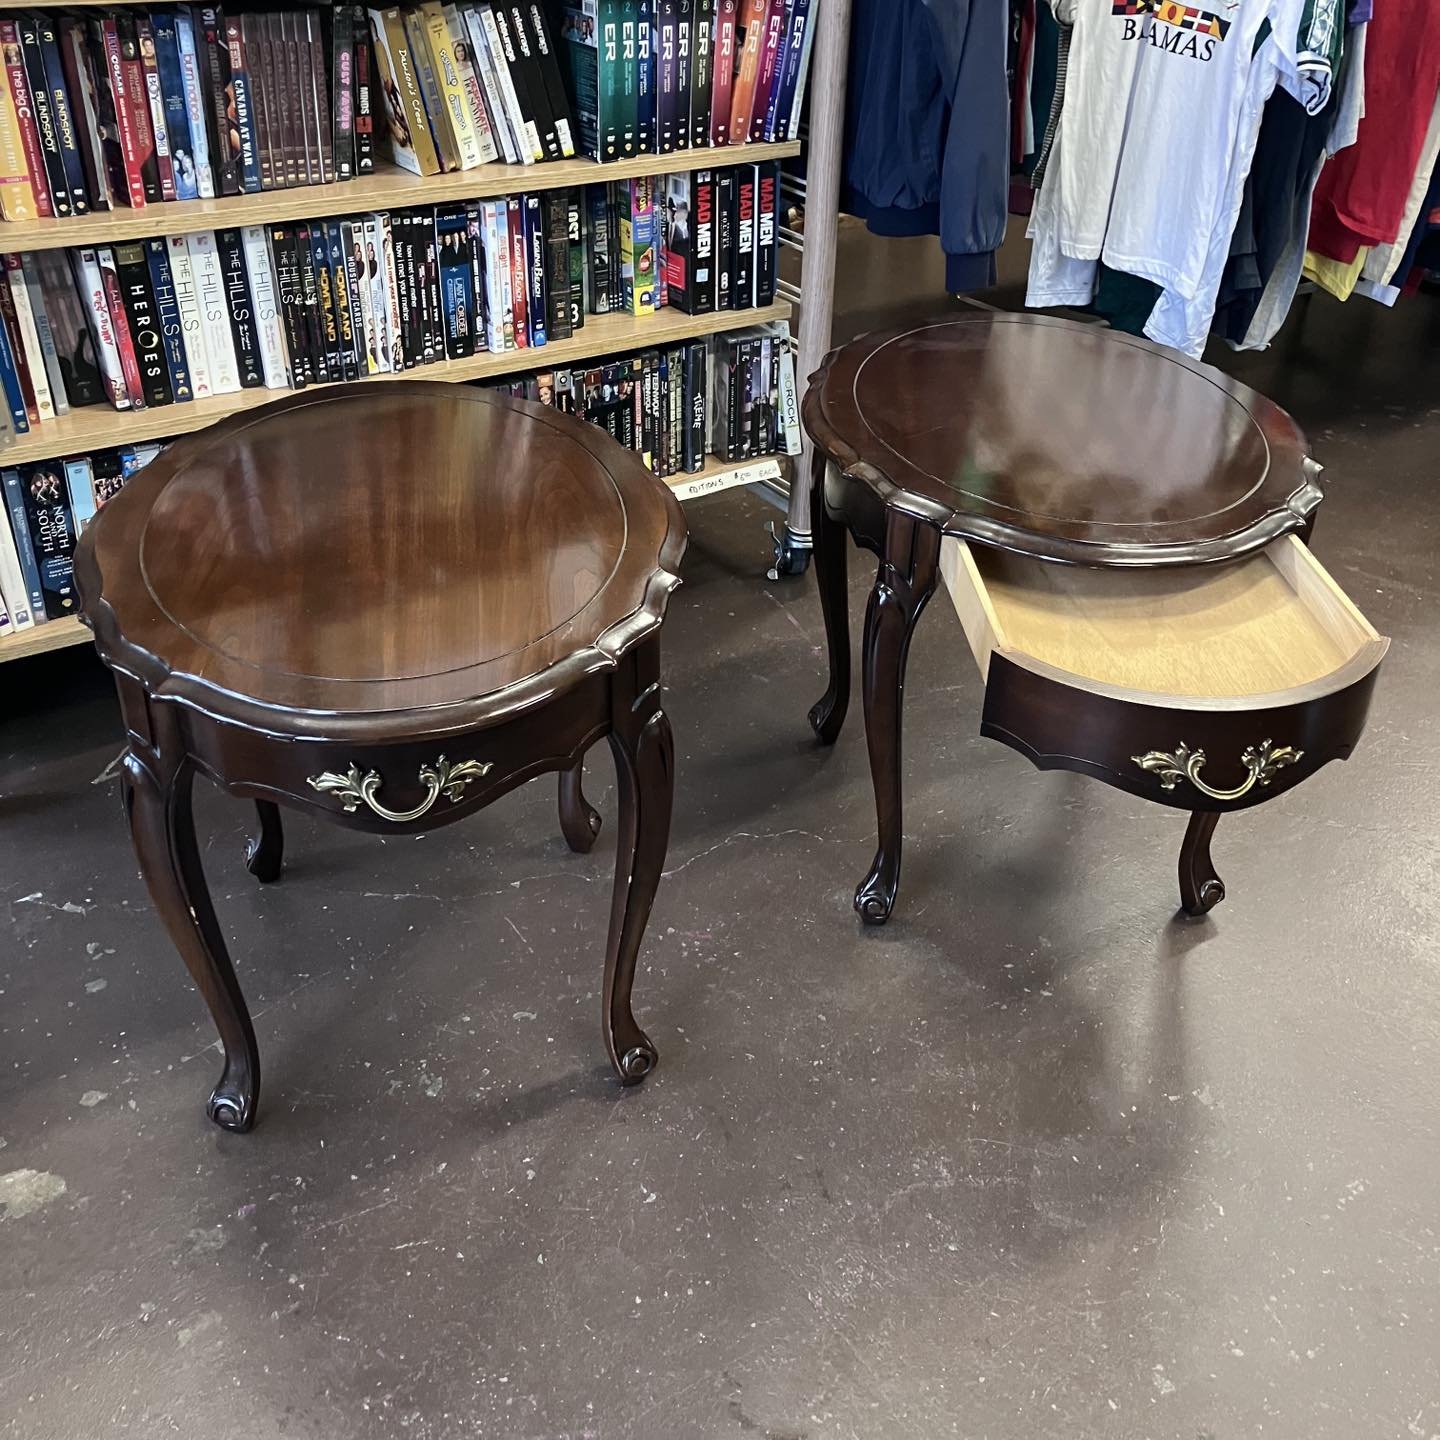 Pair of side tables

Nice condition, 8/10

$40 for the pair

🌲

#secondhand #thrift #thriftshopfinds #thriftshop #thriftstore #shoplocal #niagarafalls #ShopSmall